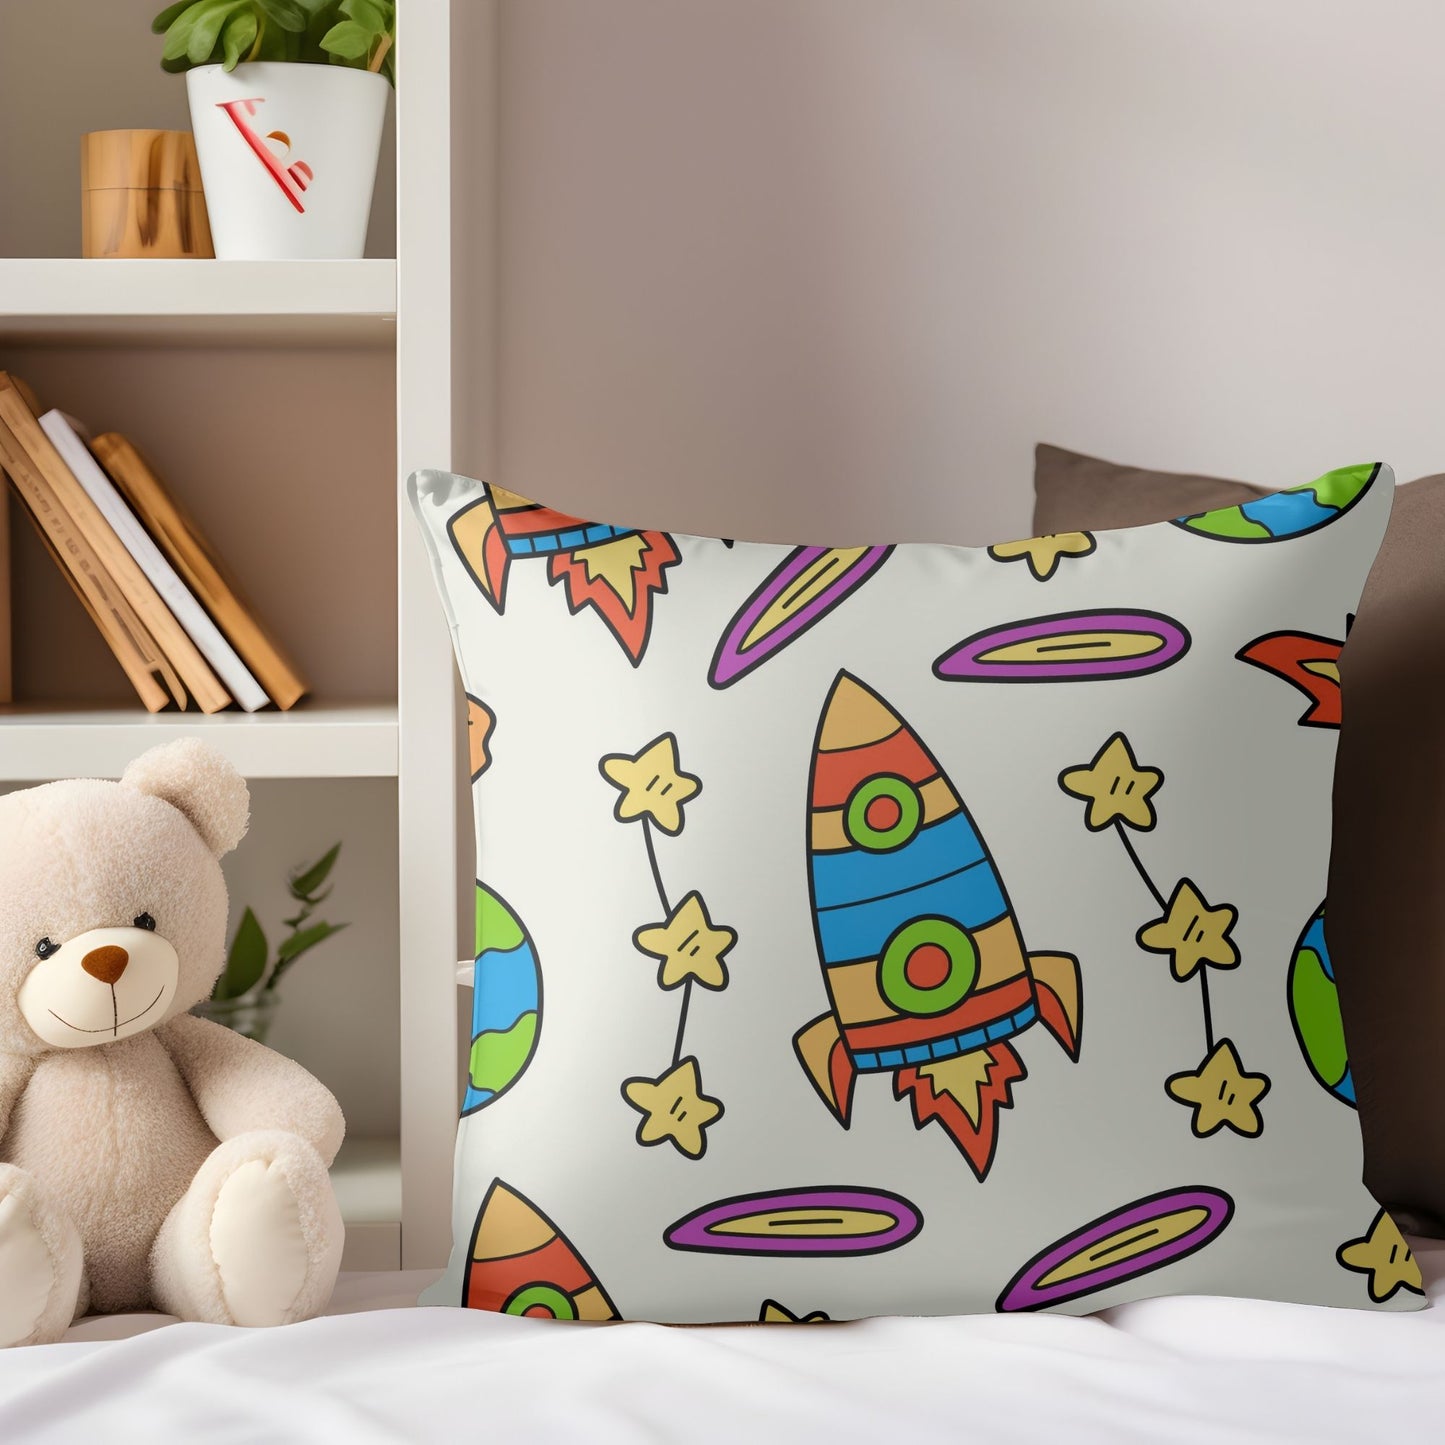 Soft and cozy rocket ship pillow for children's bedrooms.